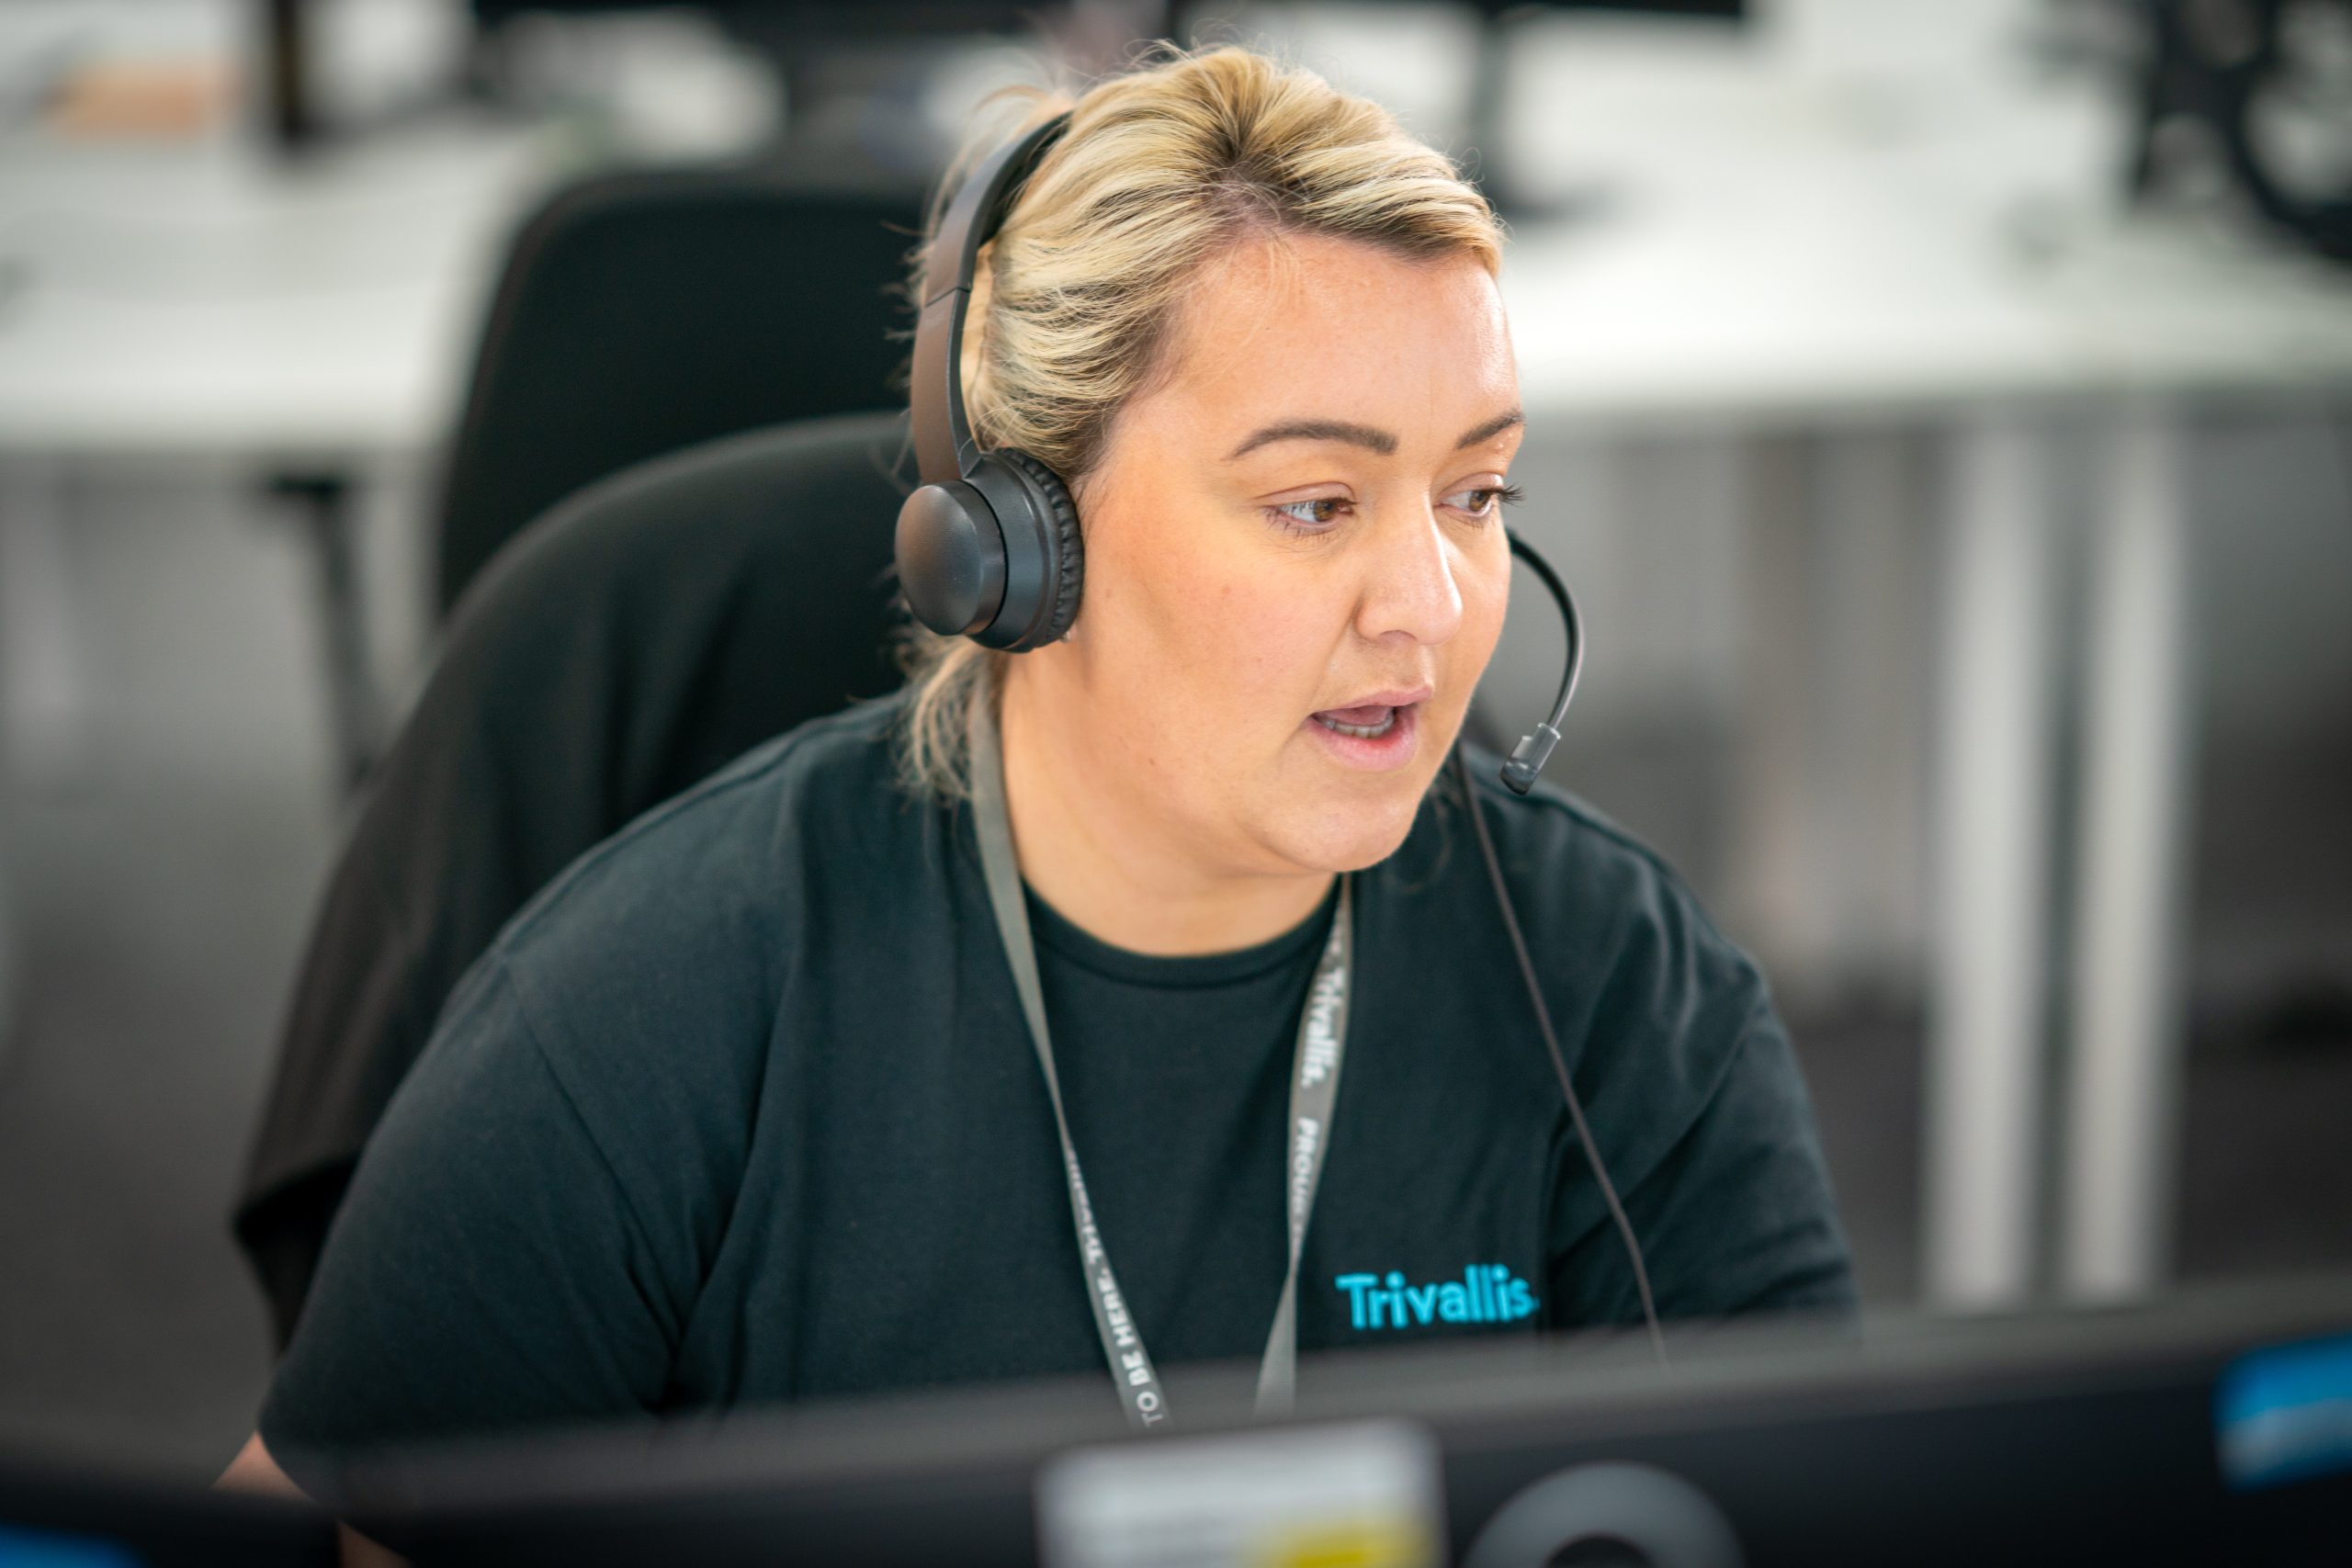 Trivallis Housing Landlord Wales A woman with short blonde hair, wearing a black t-shirt and headset, working at a computer in an office setting. she appears focused on her task. the name "trivallis" is visible on her shirt.